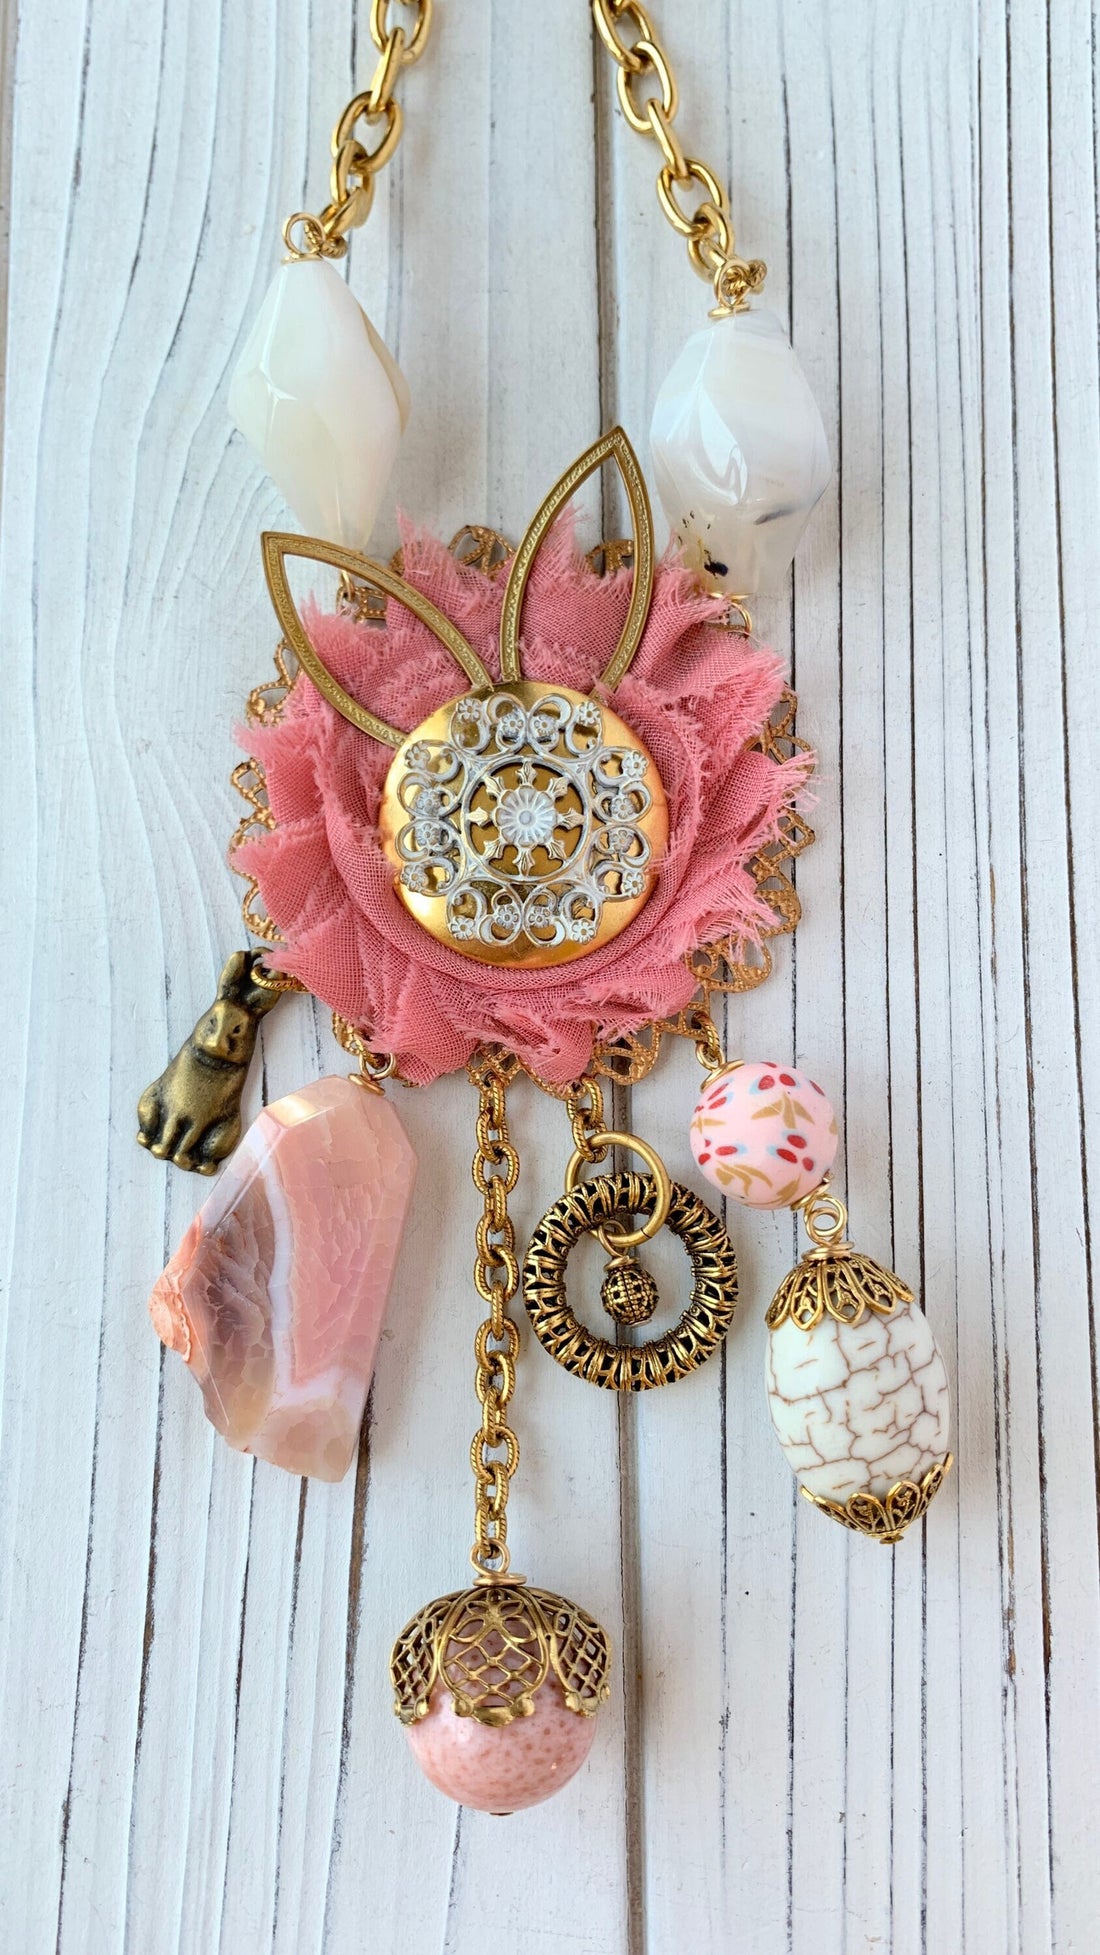 Lenora Dame Bunny Hop Statement Necklace in Delicate Pink- One of a Kind